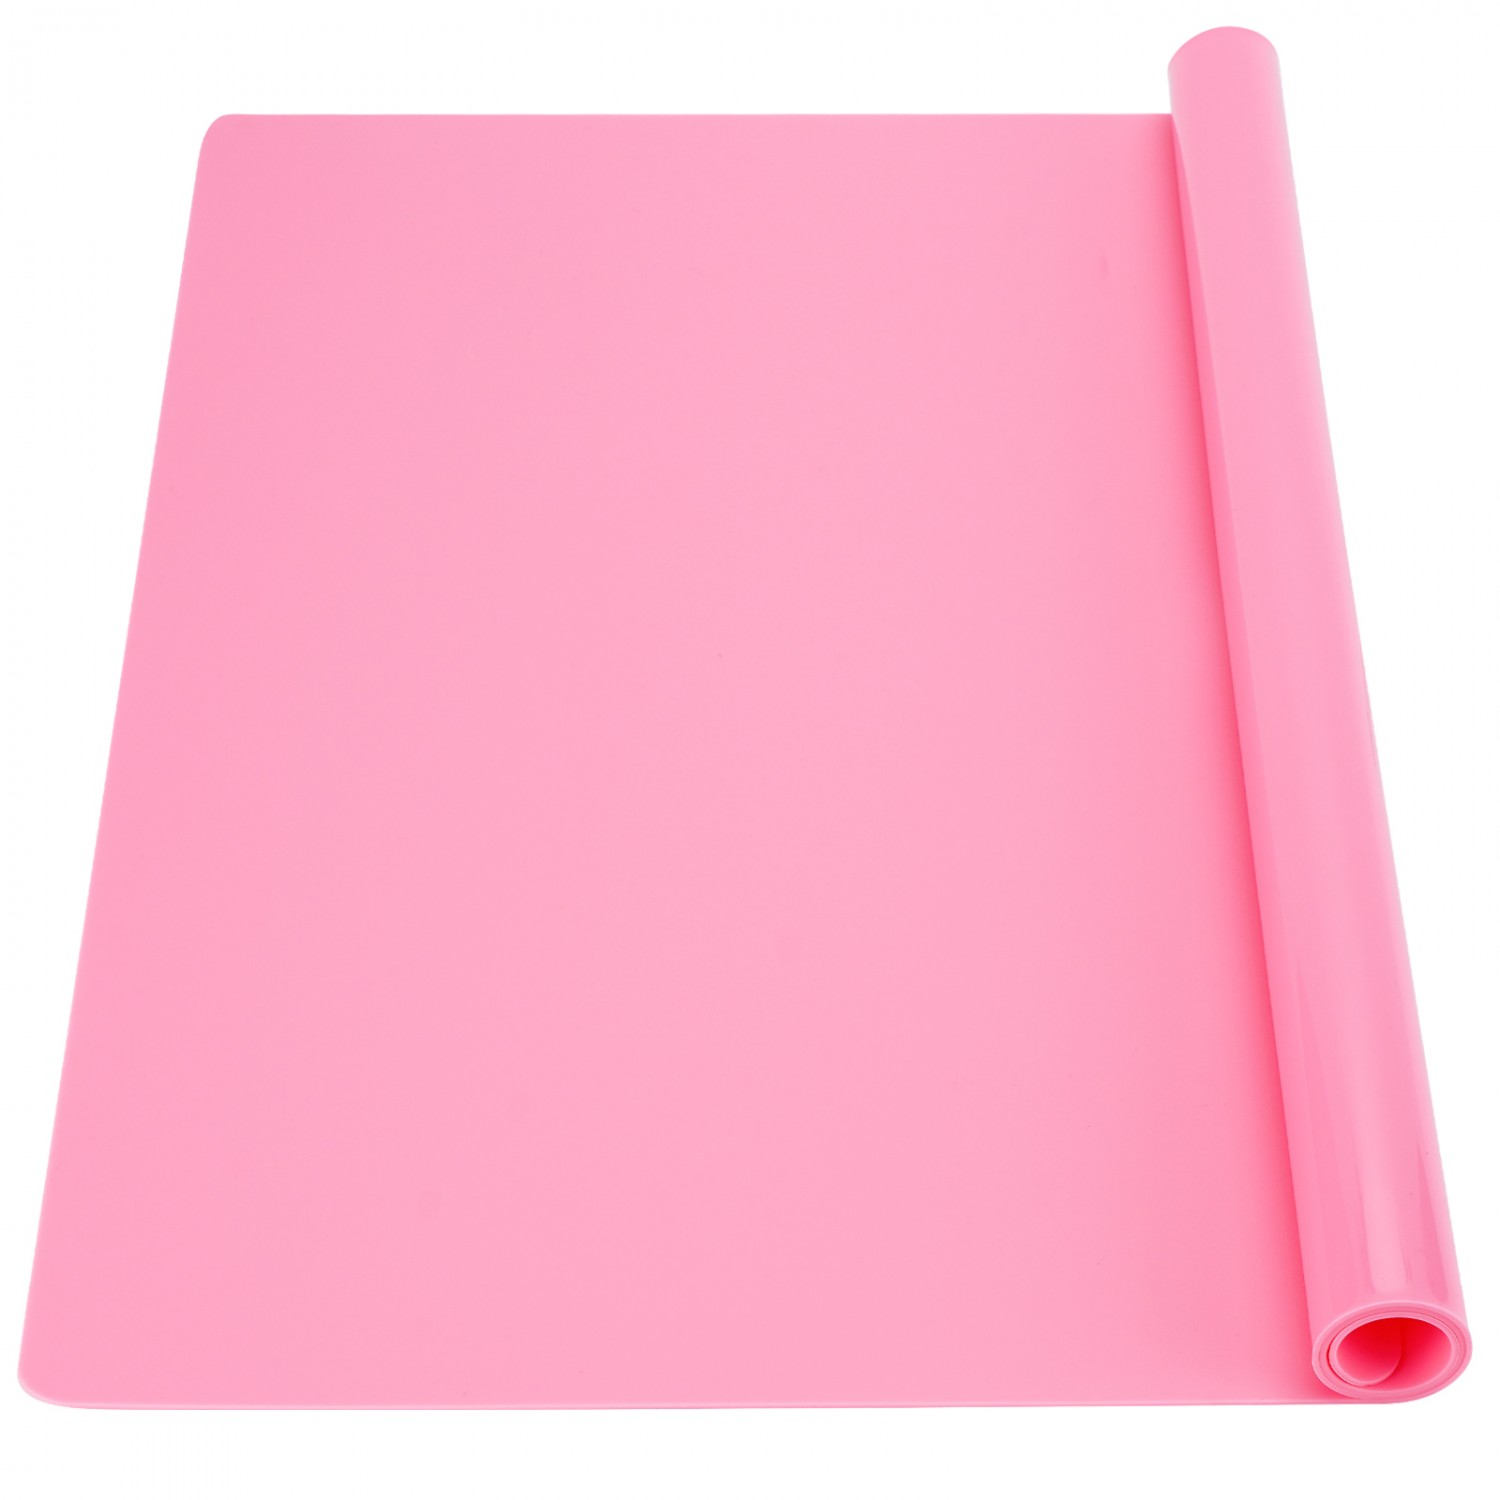 70x50cm Nonstick Silicone Crafts Table Mat